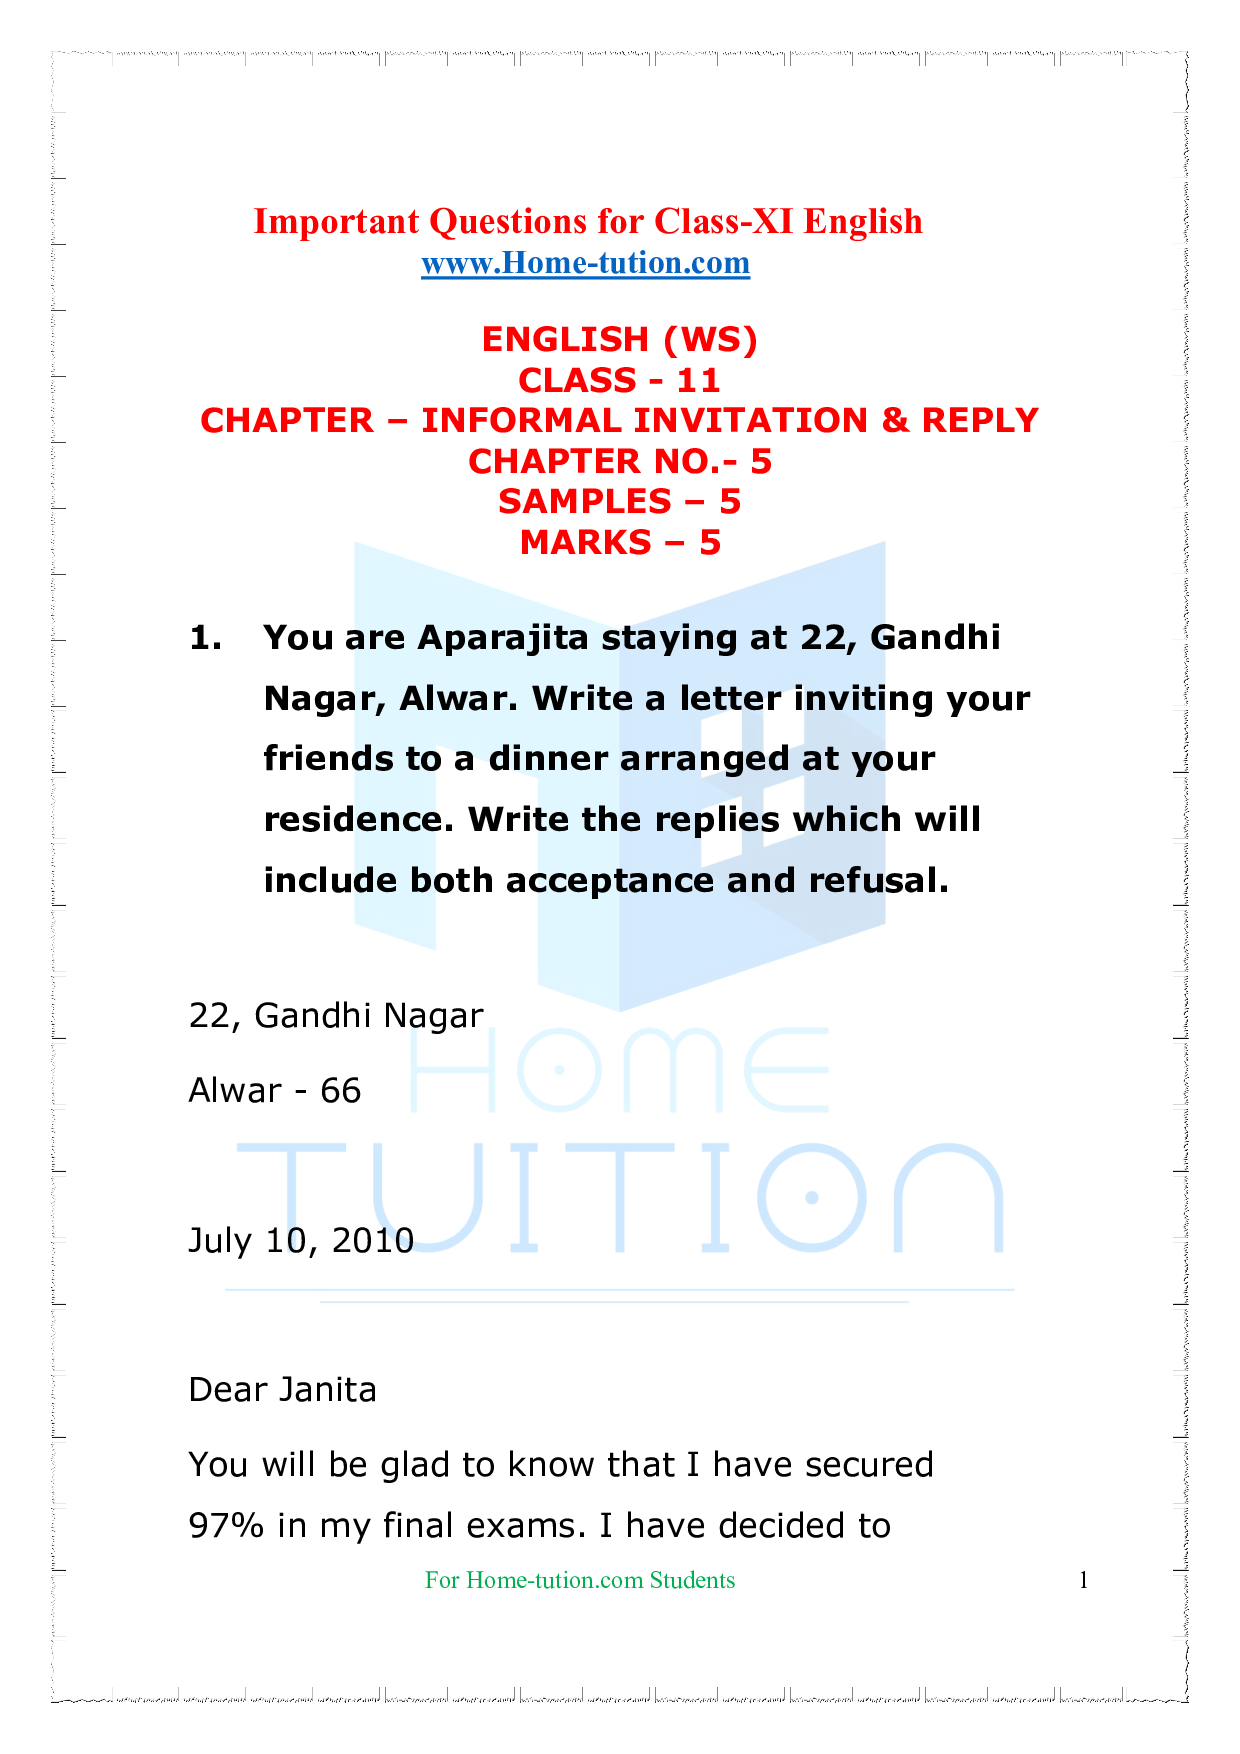 Chapter-Informal invitation & Reply